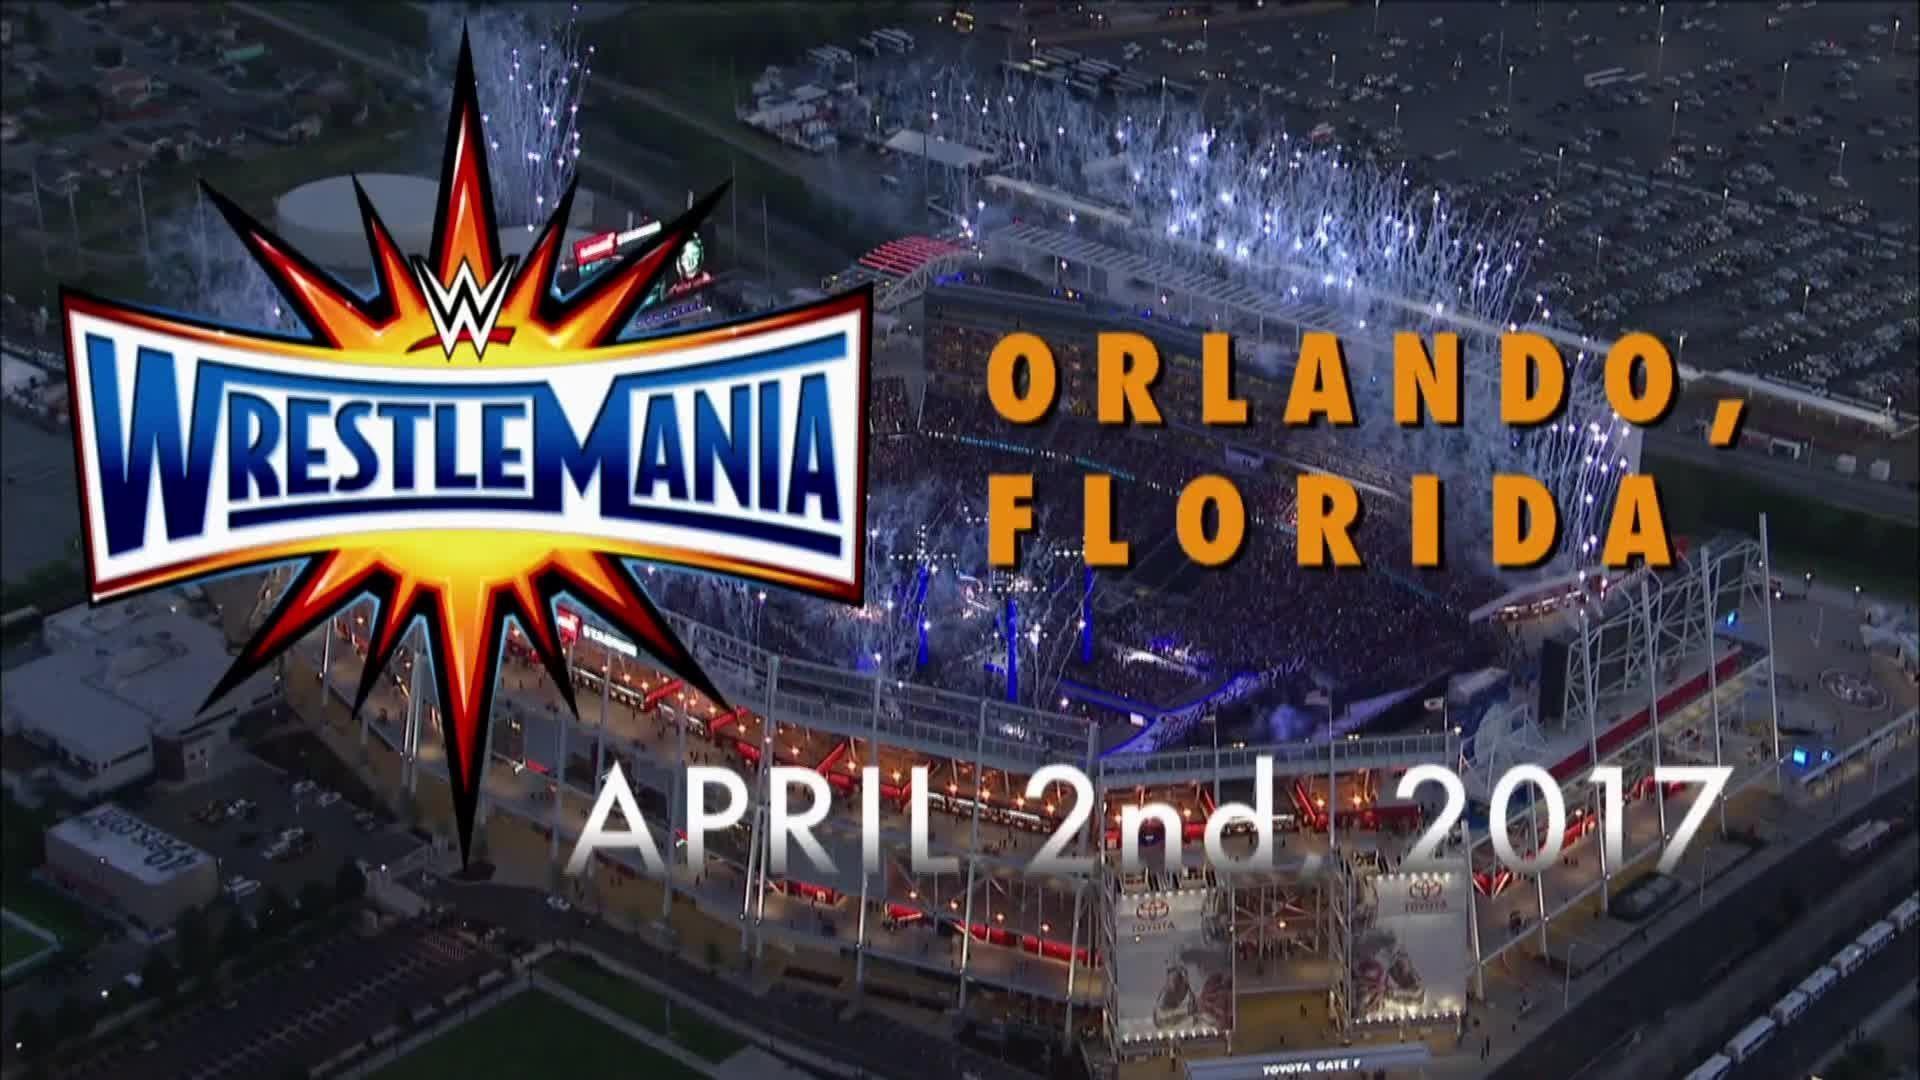 Matches That Could Happen at Wrestlemania 33